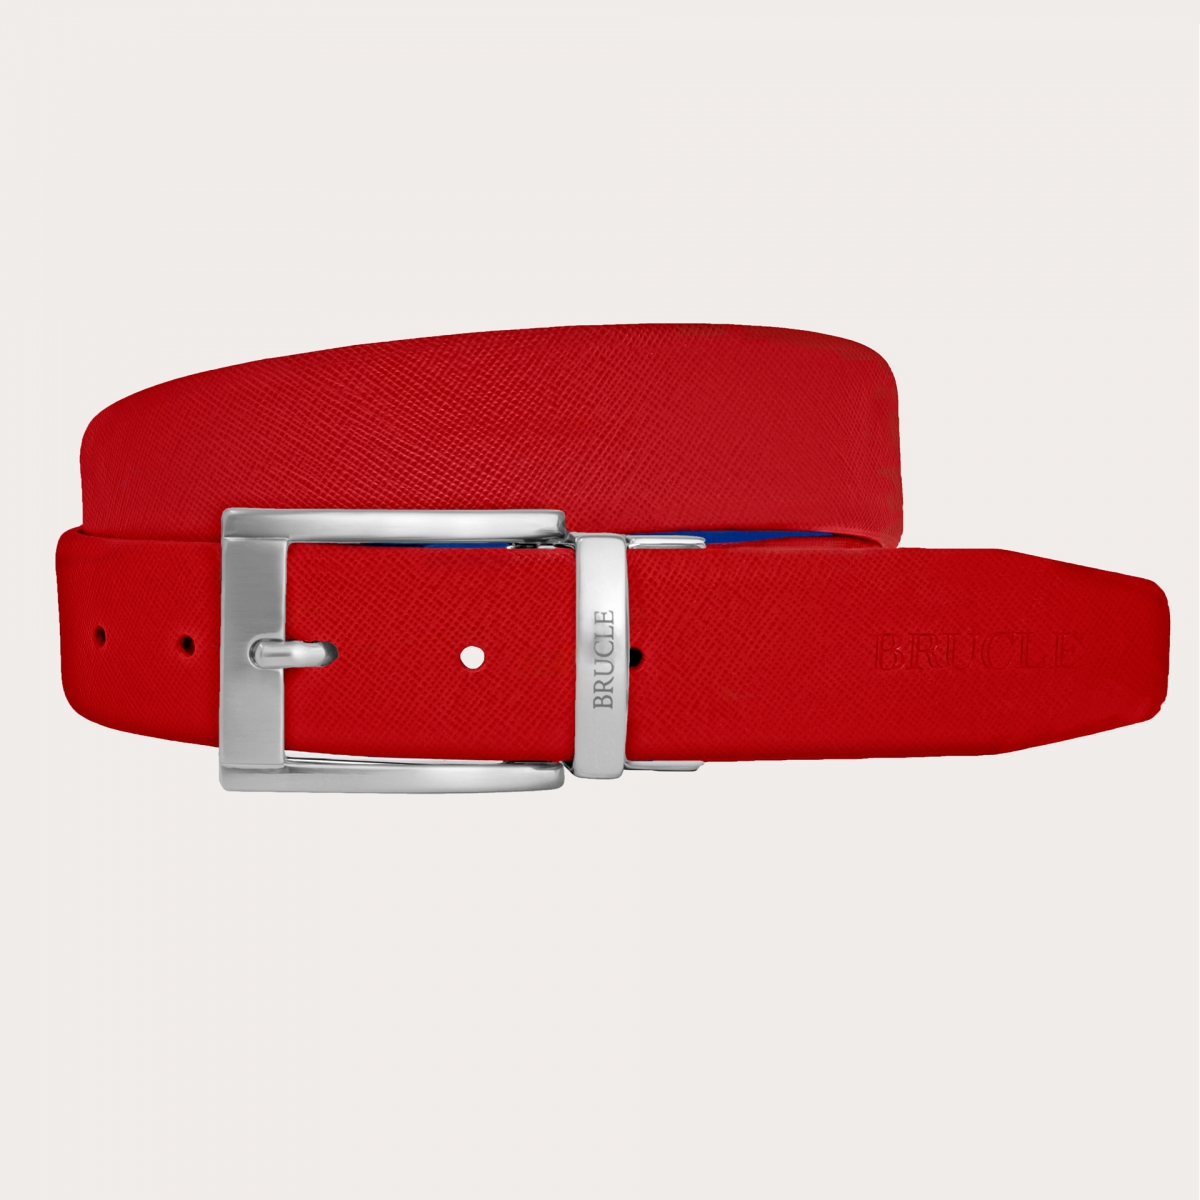 BRUCLE Reversible royal blue and red belt